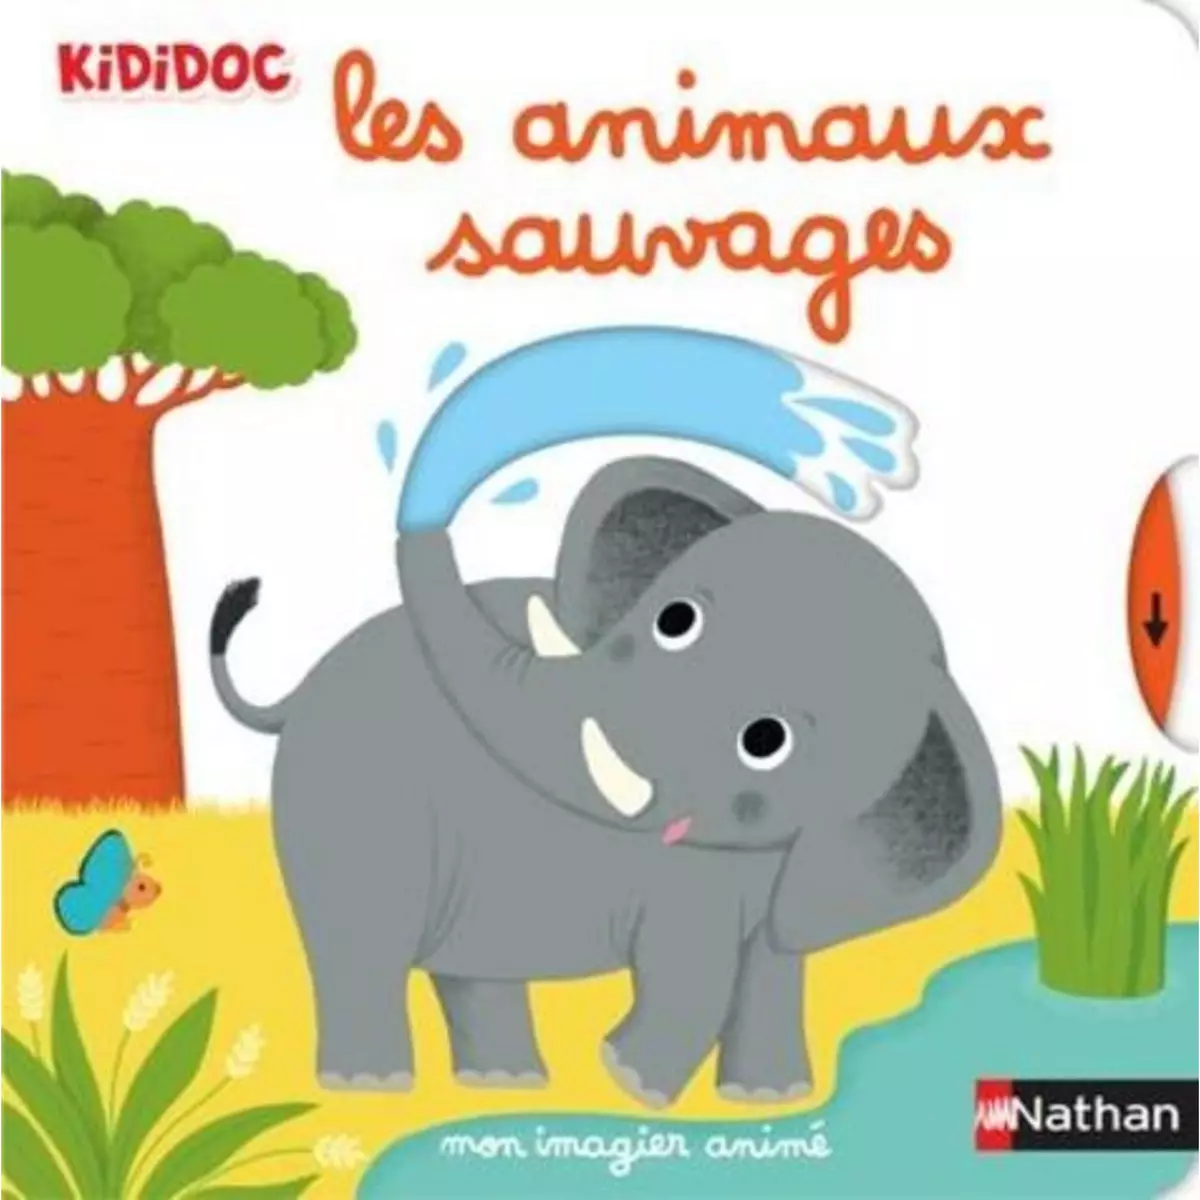  LES ANIMAUX SAUVAGES, Choux Nathalie